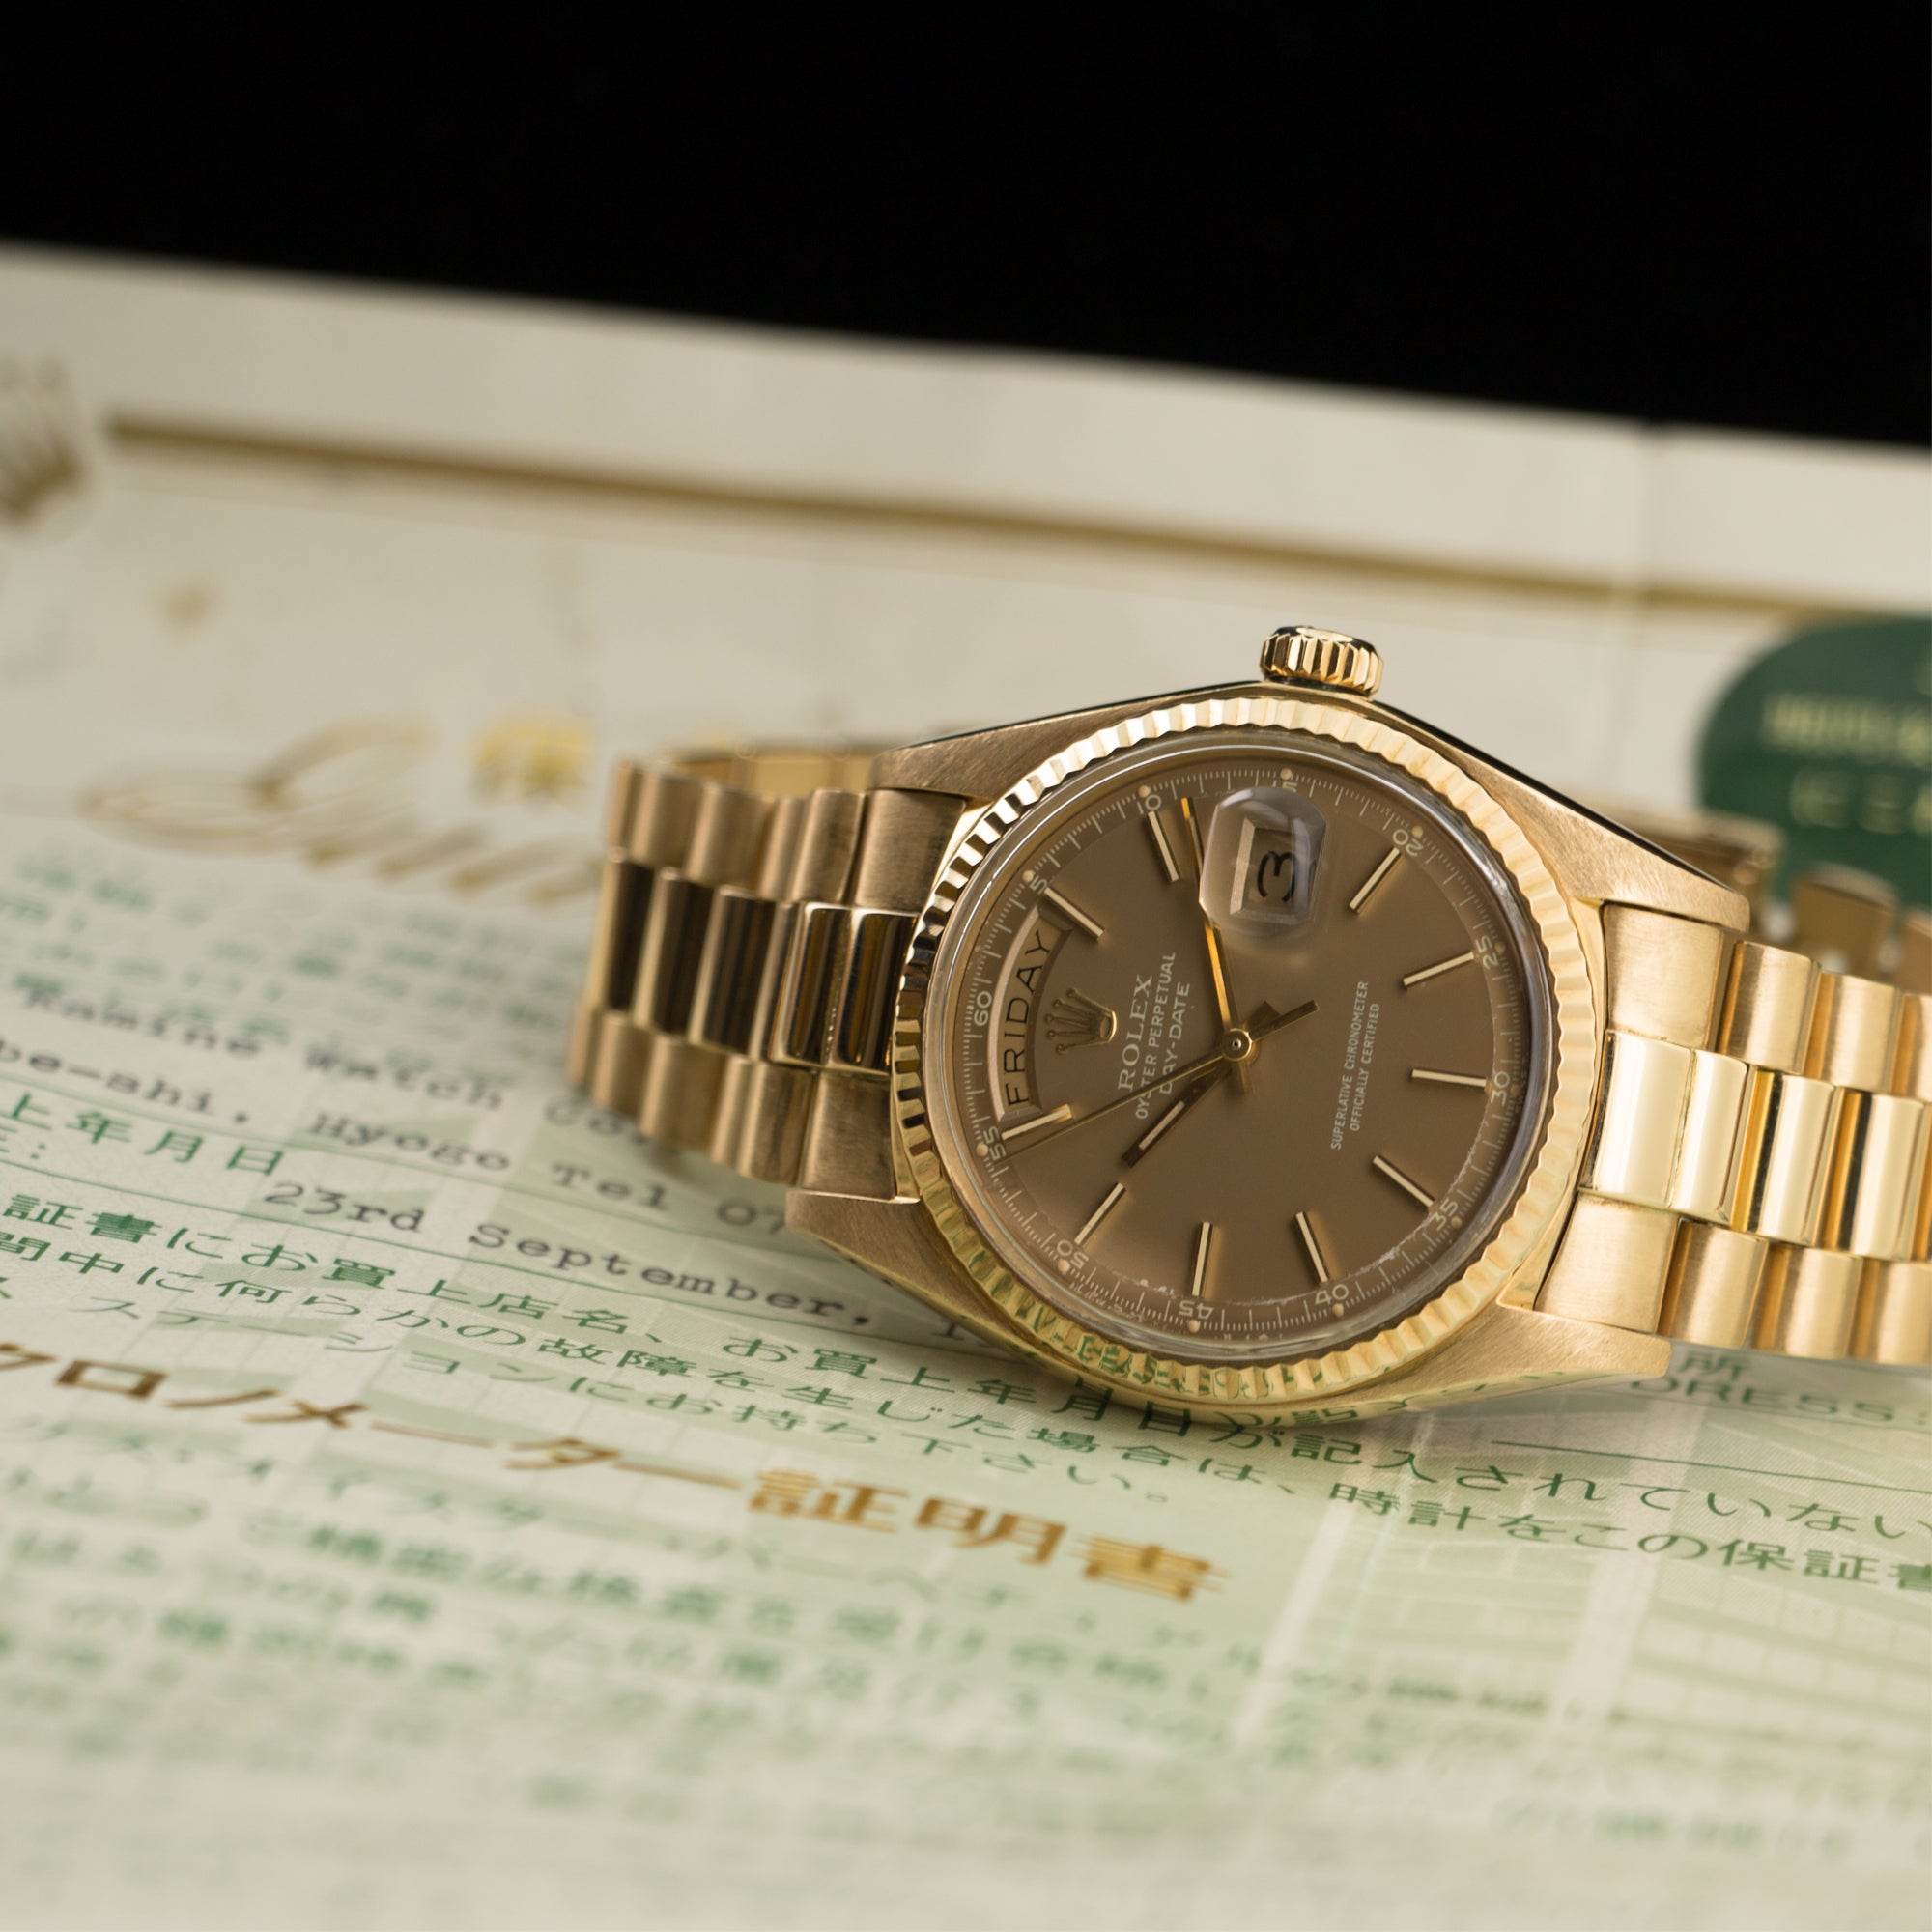 Rolex - Rolex Yellow Gold Day-Date Watch Ref. 1803 with Original Papers - The Keystone Watches